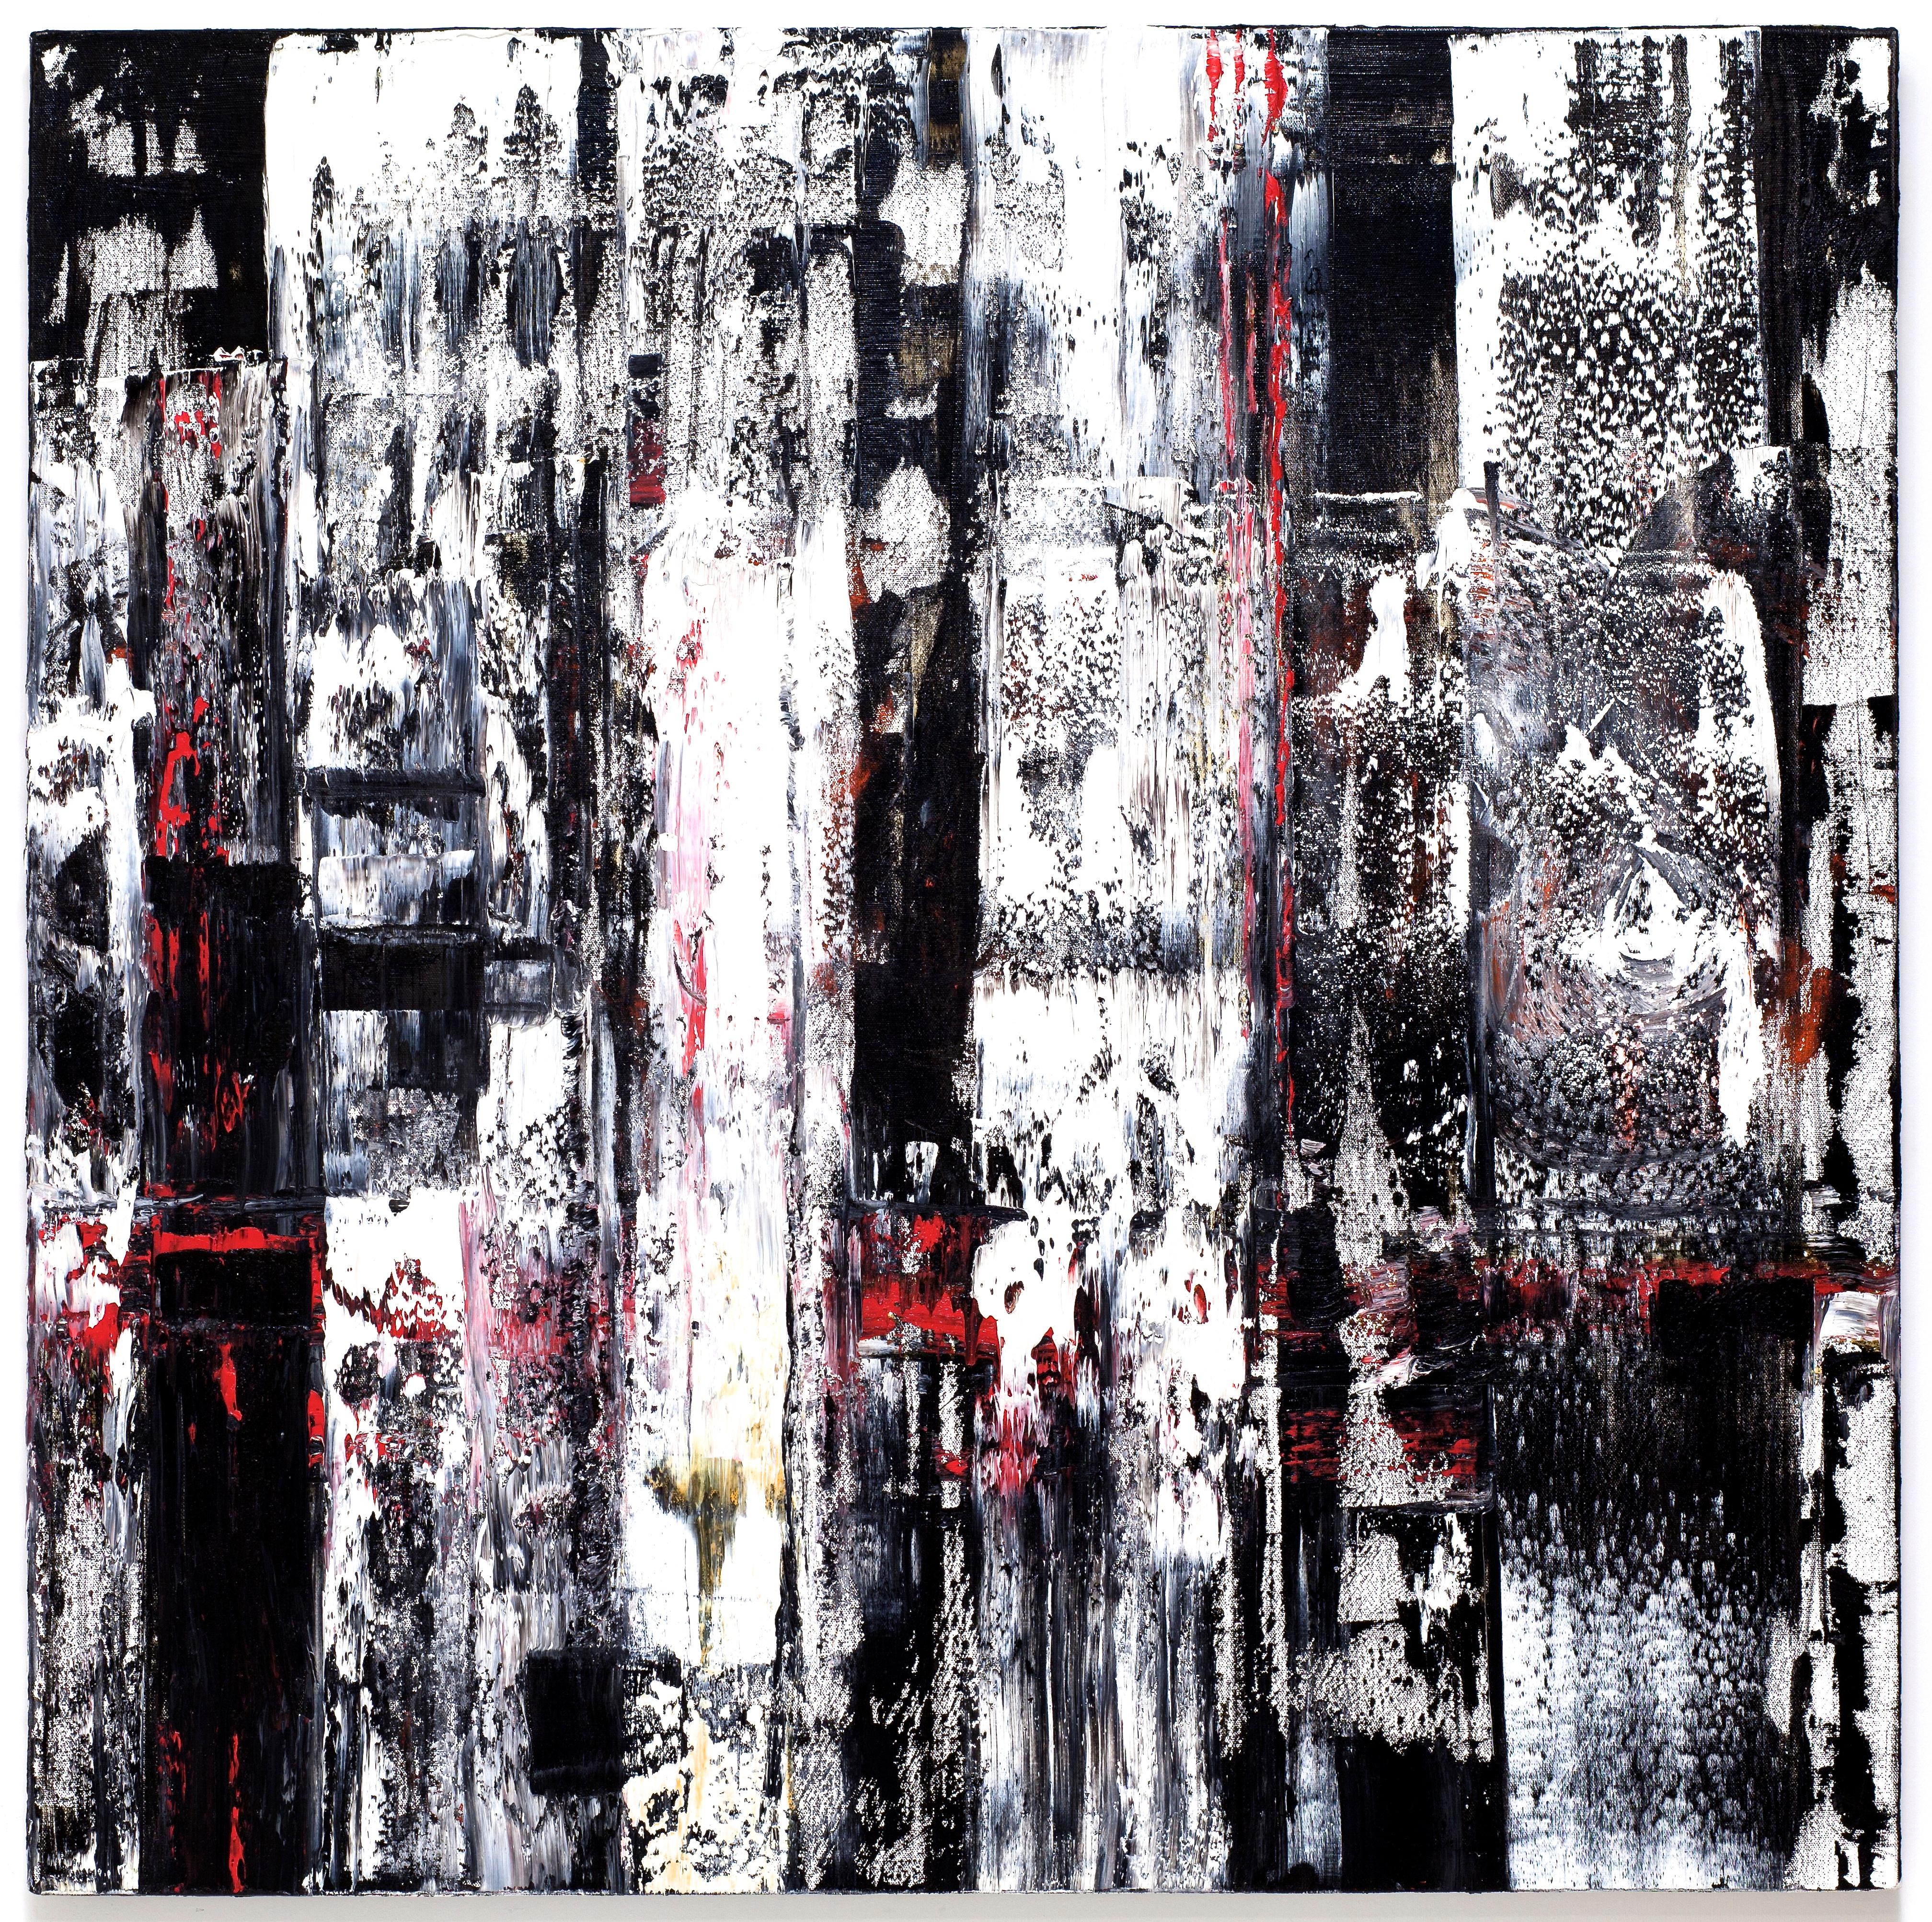 Linda Holt Abstract Painting - "Large Abstraction, Black, White and A Little Red" Oil Paint Expressionist Bold